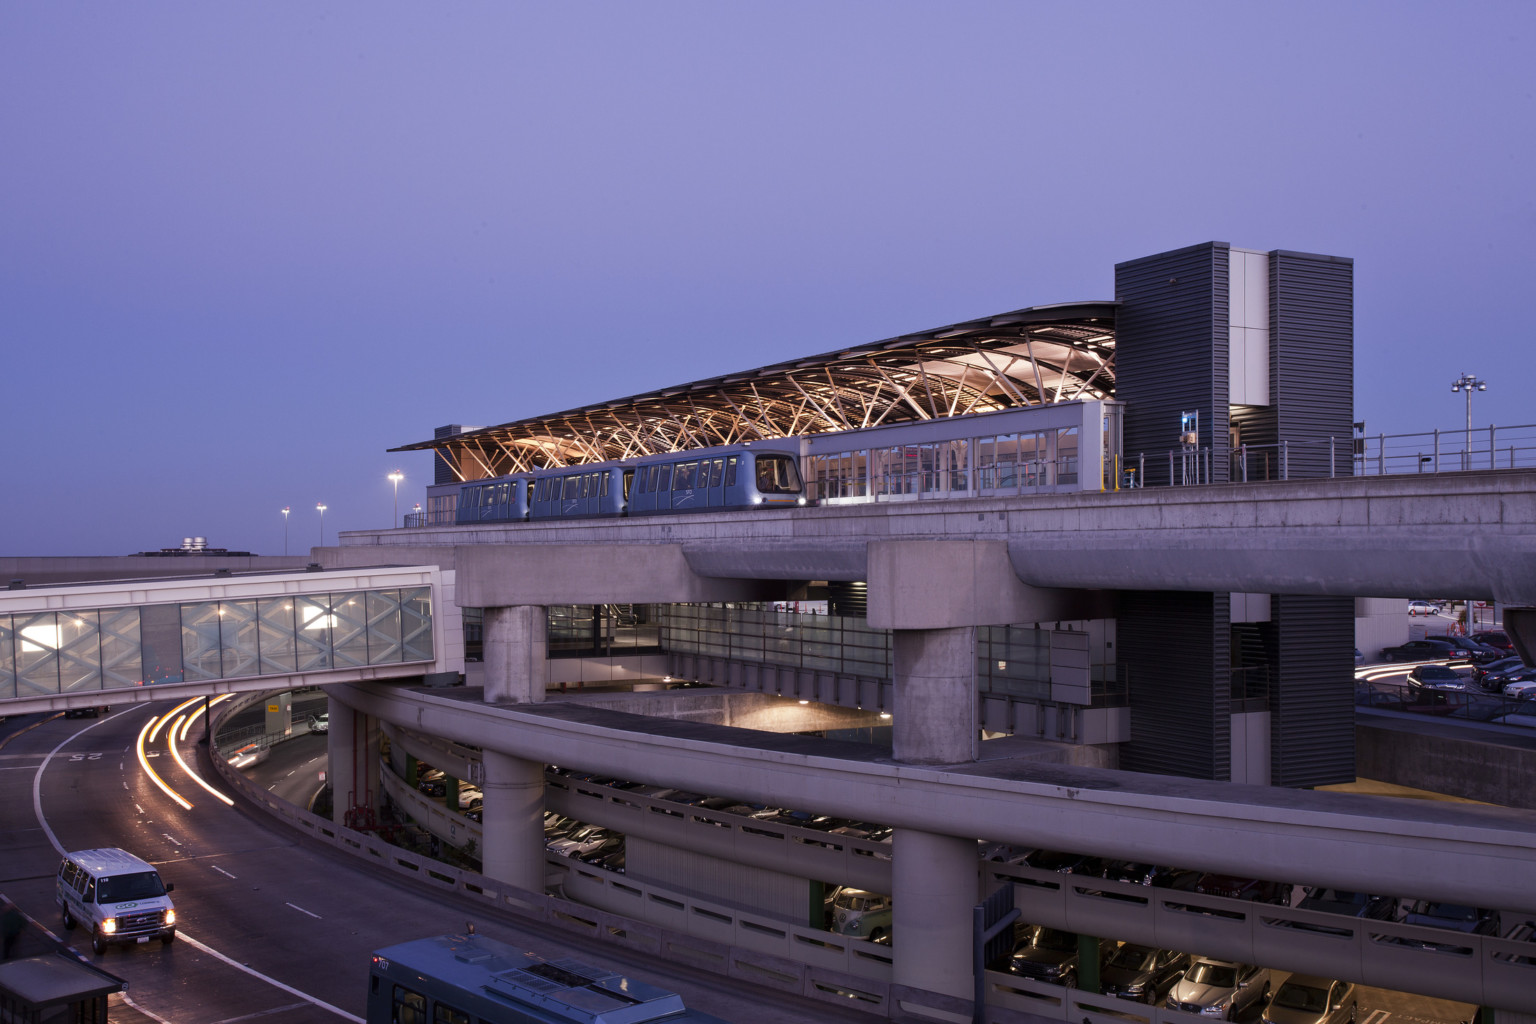 San Francisco International Airport AirTrain Station. Elevated railway with skywalk over road connecting to 1st floor